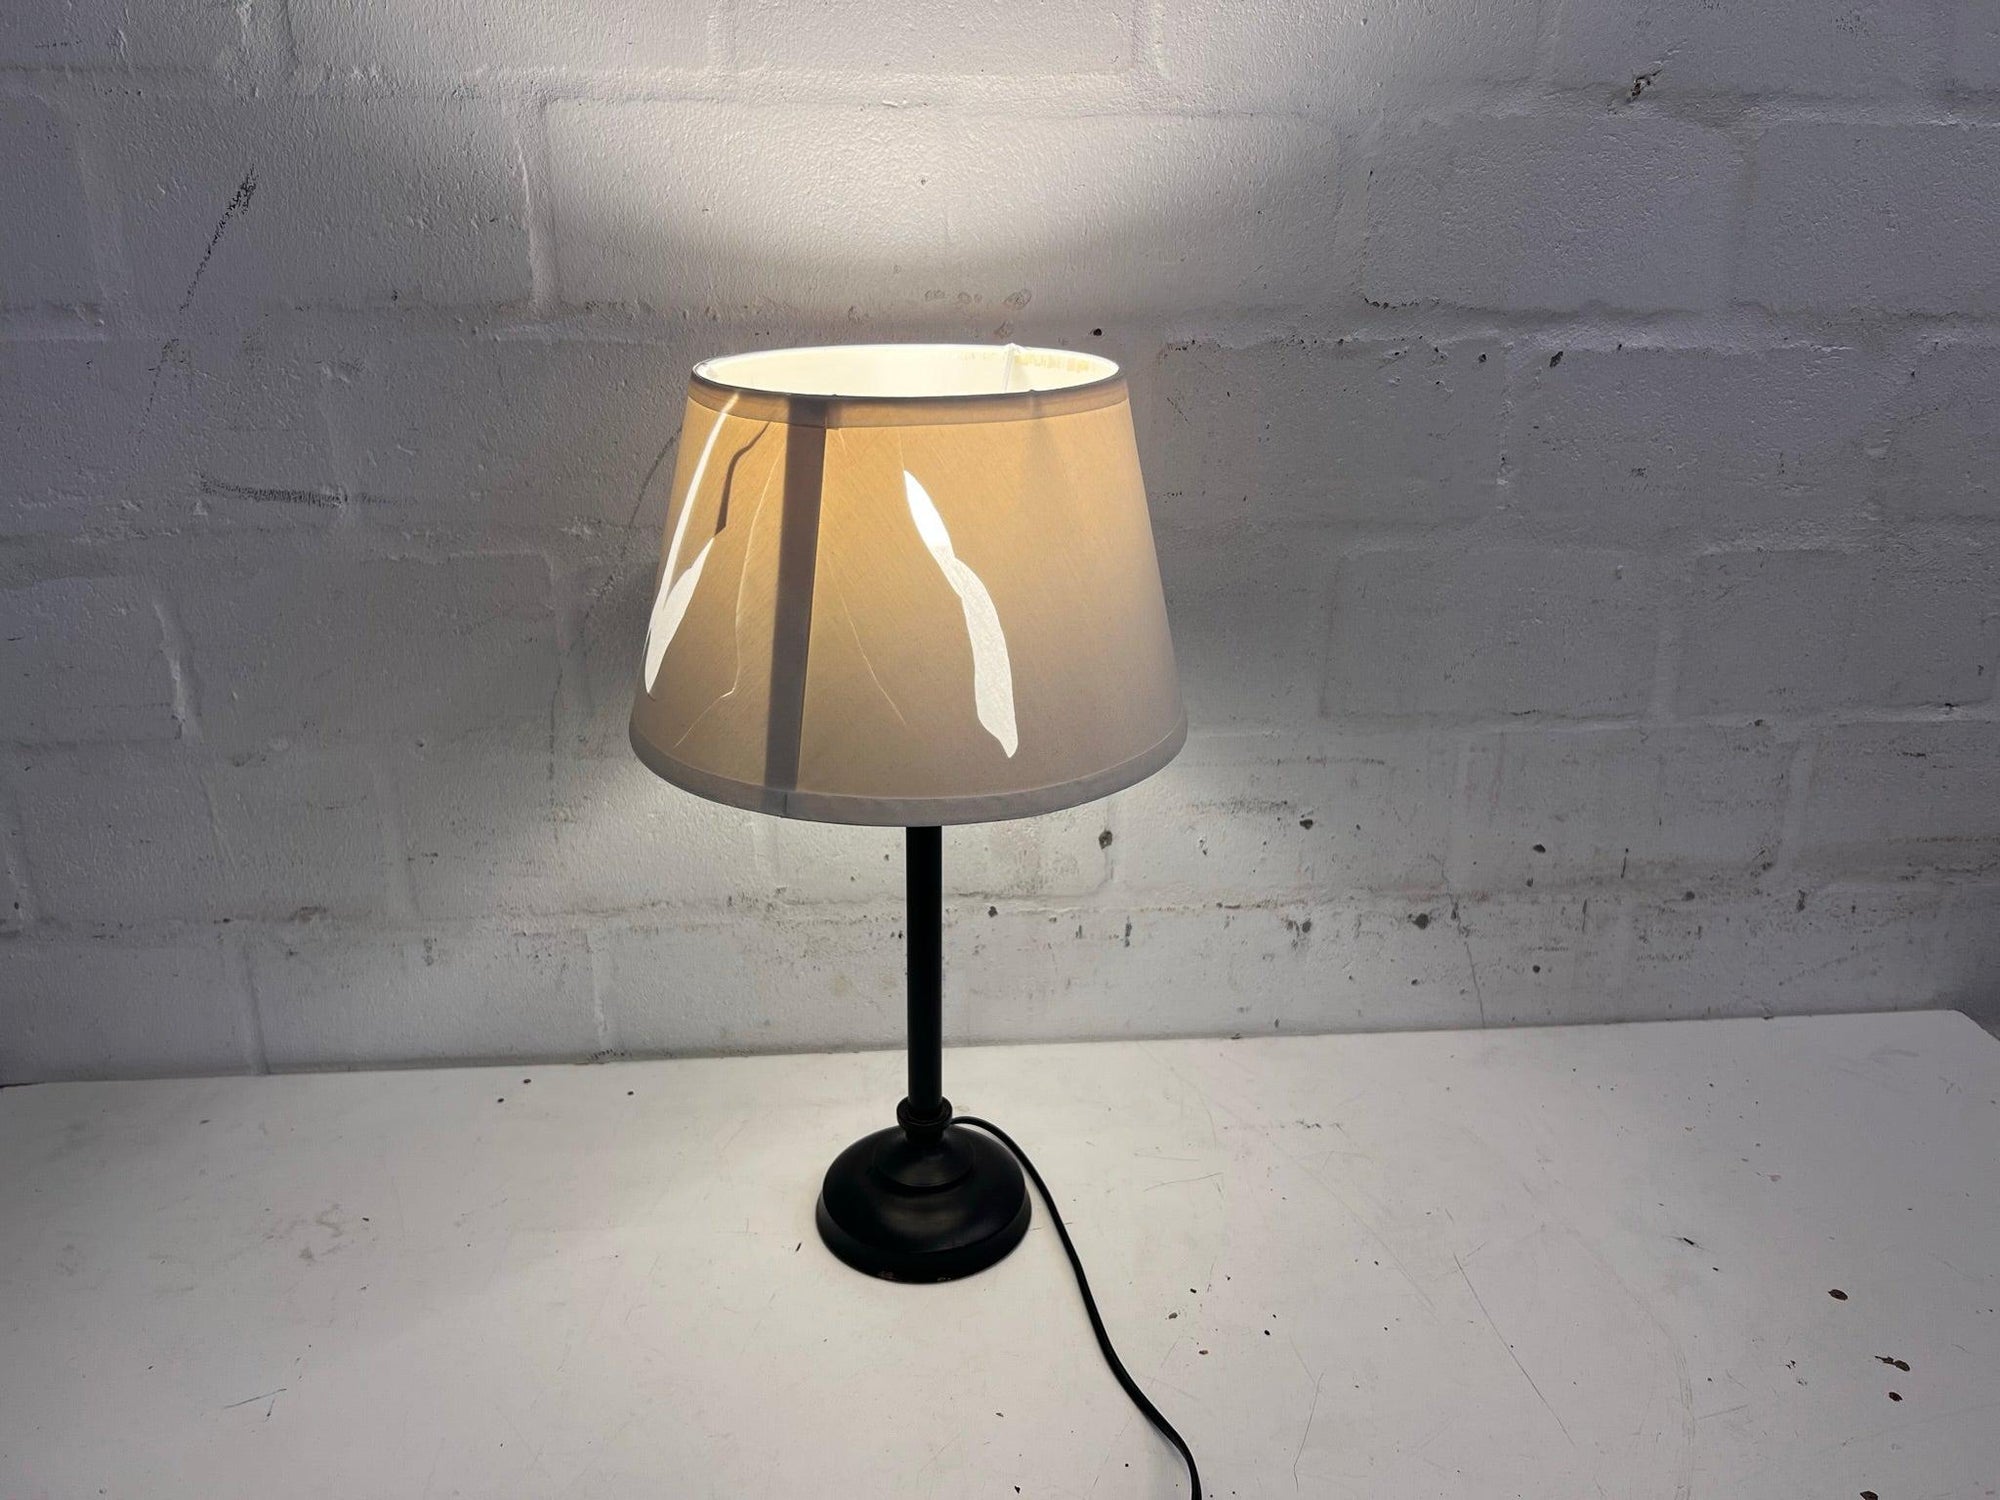 Beige Shade Lamp With Black Stand (Tears In Shade)